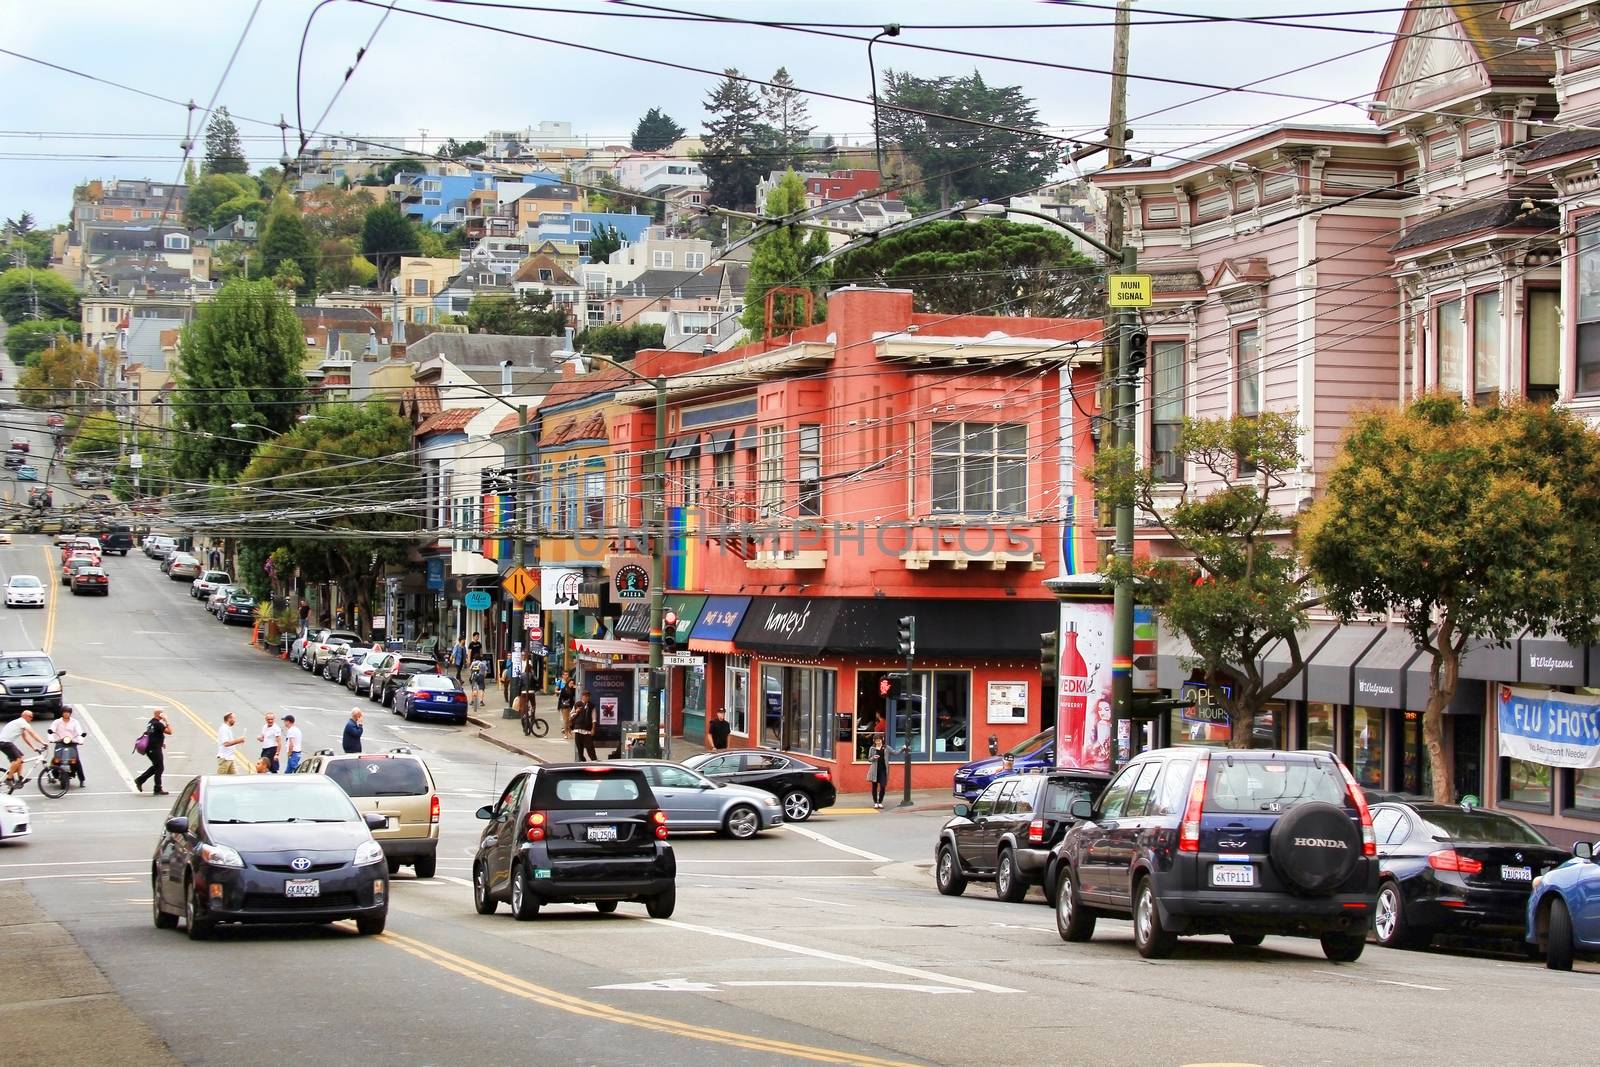 San Francisco, CA, USA - September 12, 2013: Castro district in San Francisco, USA. Castro is one of the United States' first and best-known gay neighborhoods, and it is currently its largest.